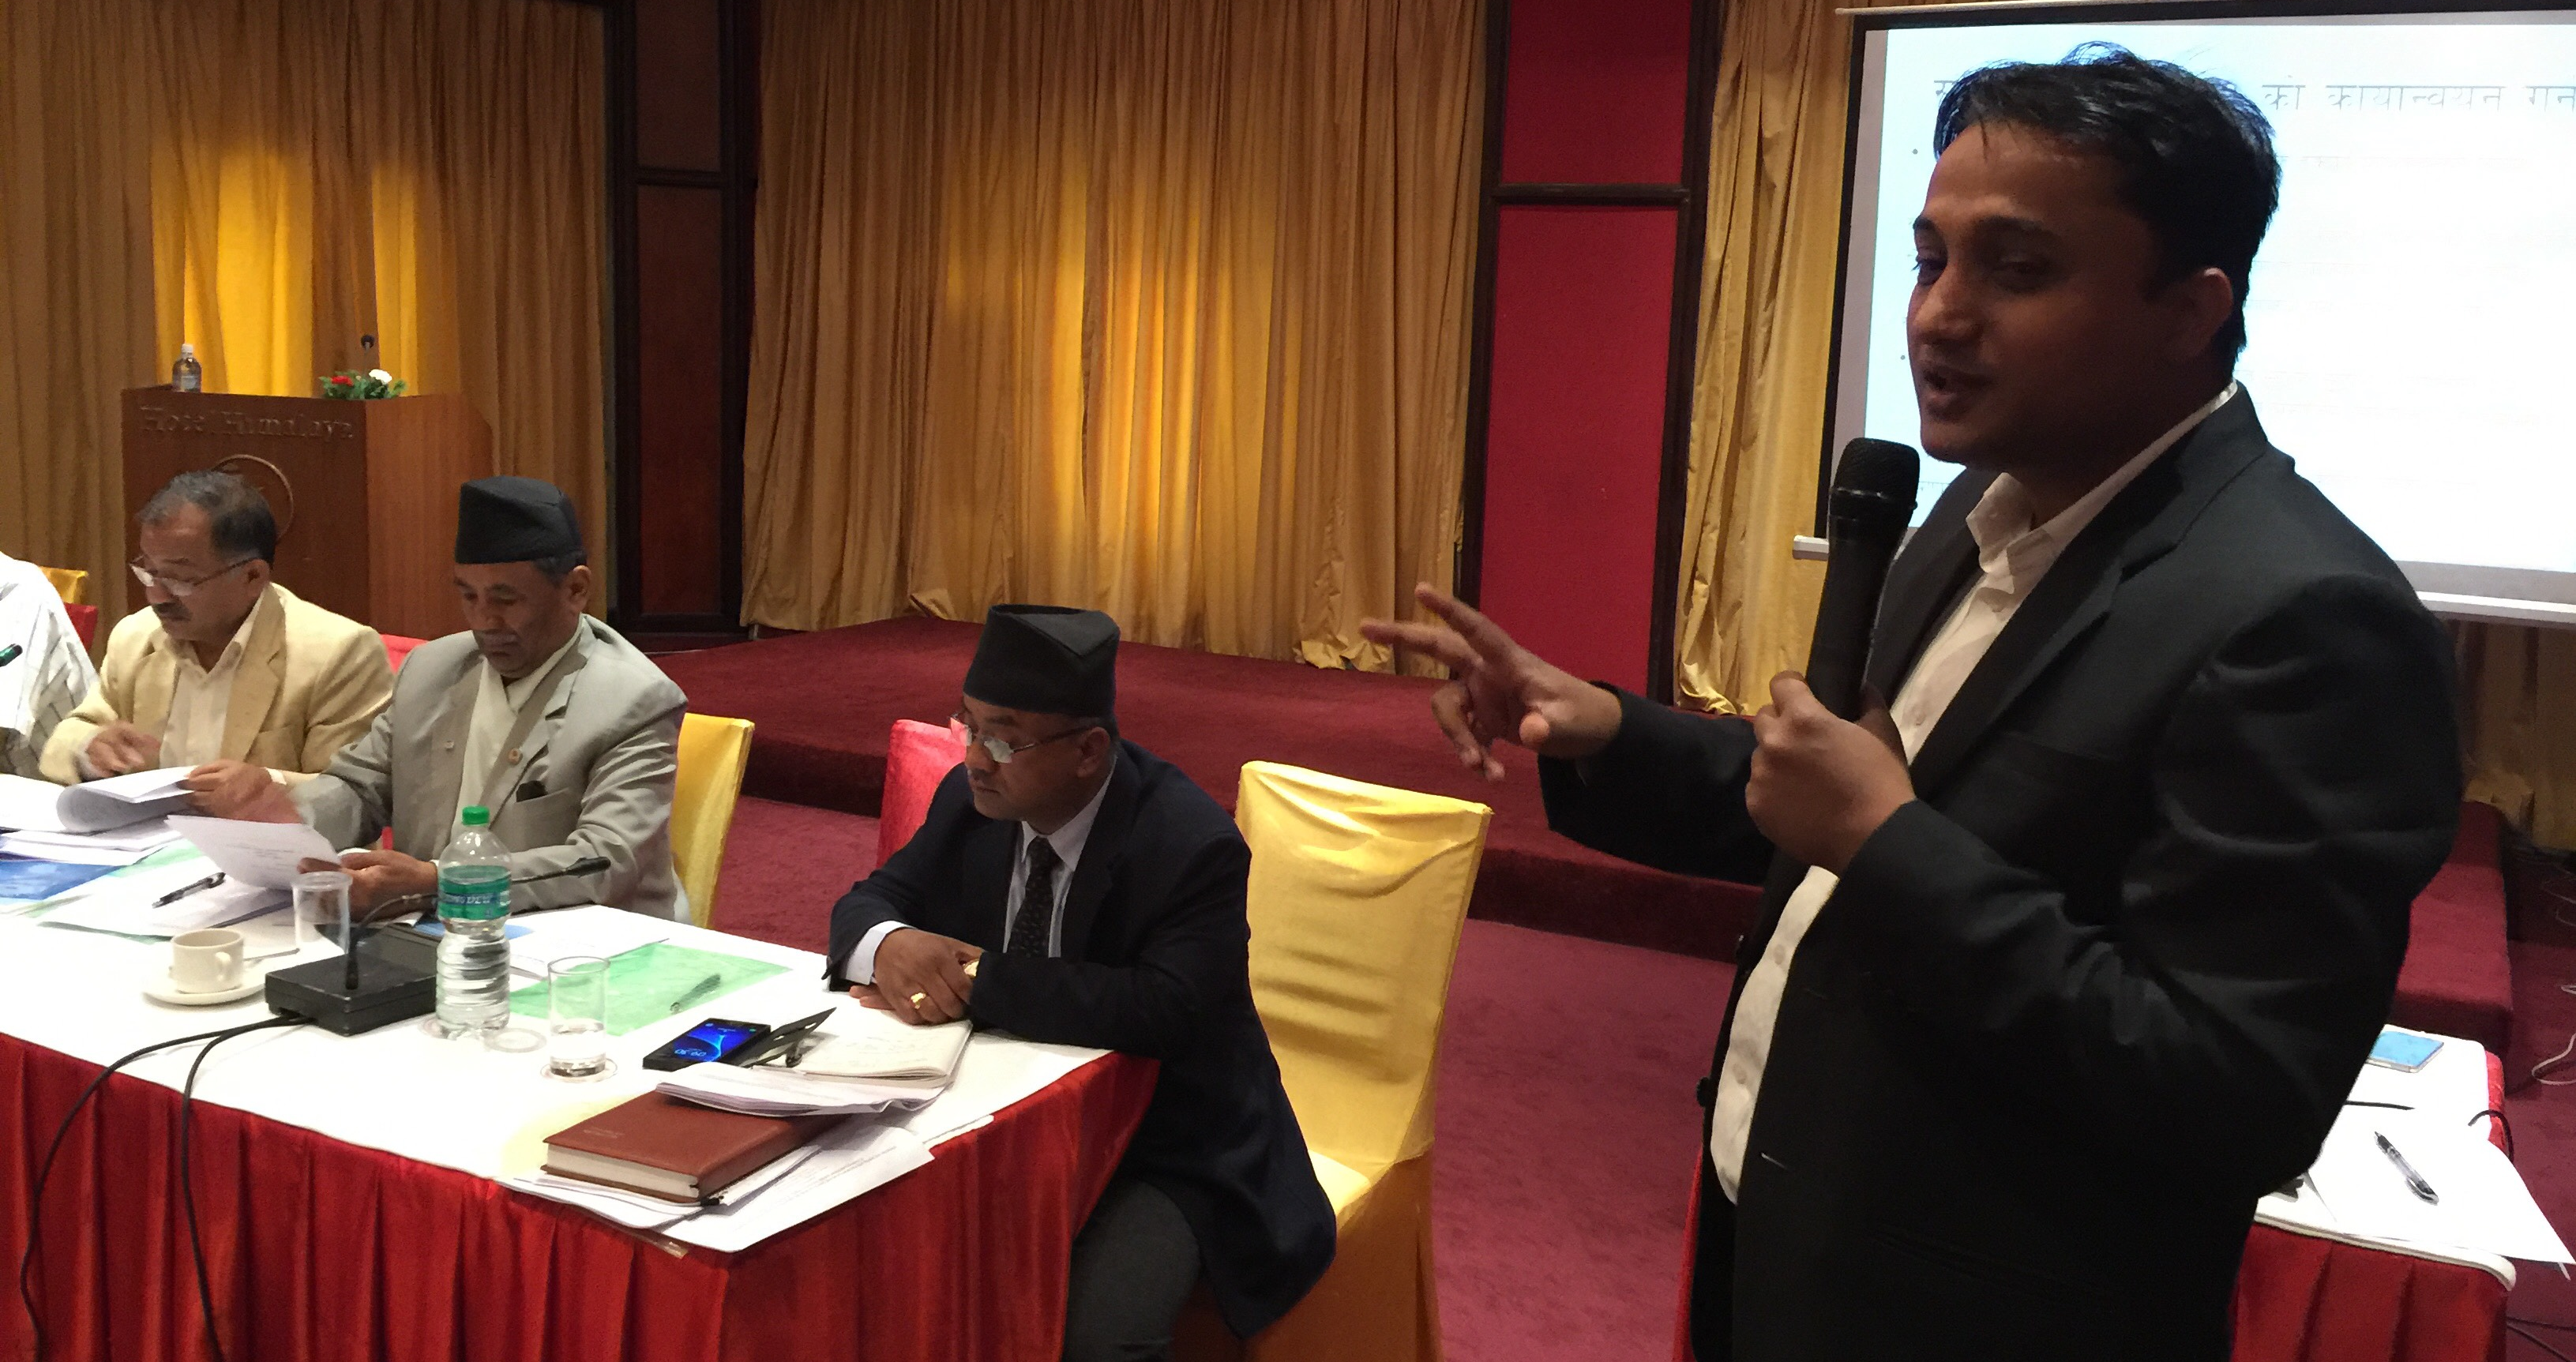 Dipendra Jha introducing draft bill to the members of parliament and civil society actors